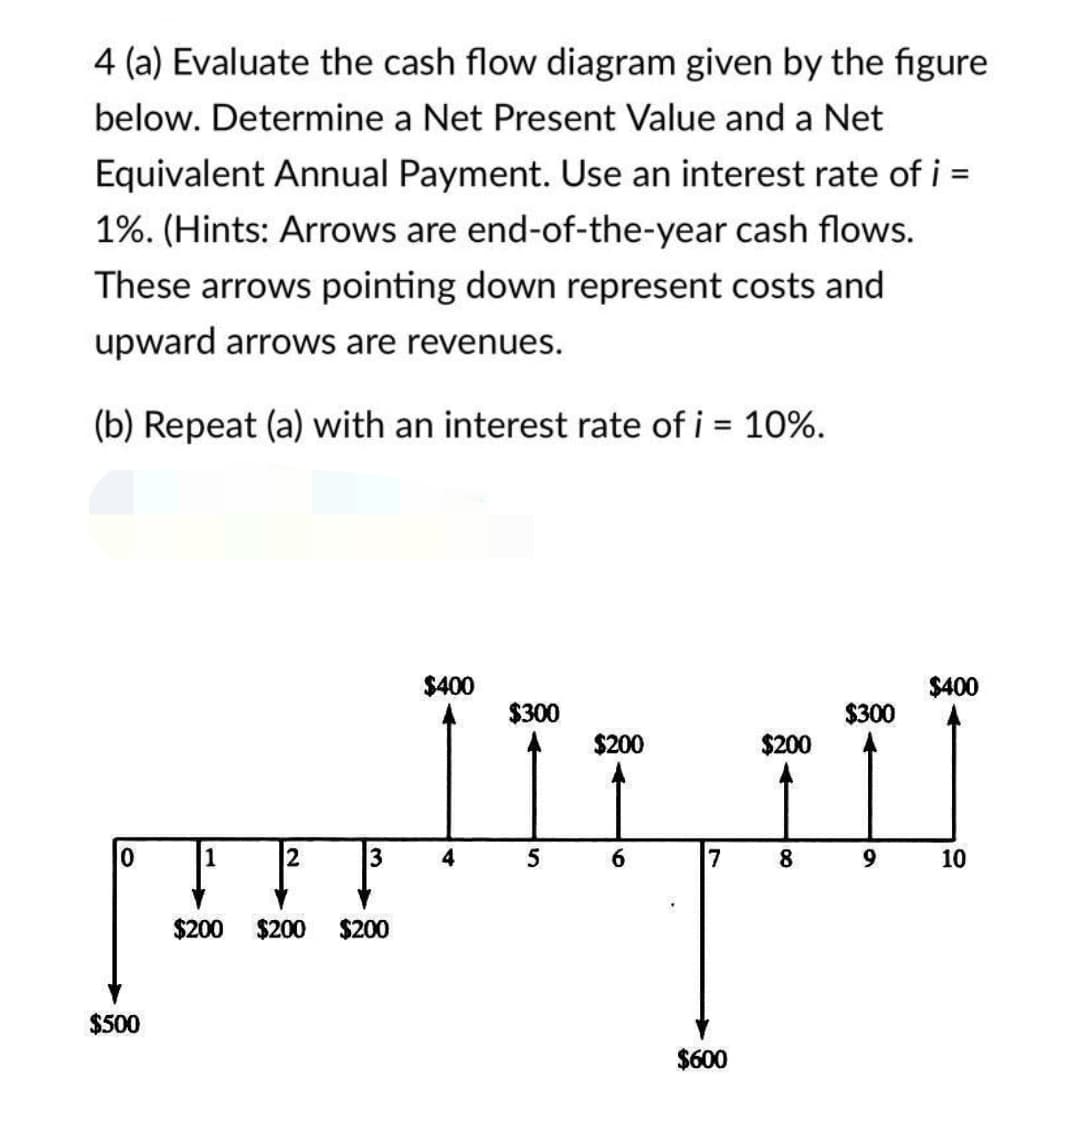 4 (a) Evaluate the cash flow diagram given by the figure
below. Determine a Net Present Value and a Net
Equivalent Annual Payment. Use an interest rate of i =
1%. (Hints: Arrows are end-of-the-year cash flows.
These arrows pointing down represent costs and
upward arrows are revenues.
(b) Repeat (a) with an interest rate of i = 10%.
$400
$400
$300
$300
$200
$200
1
2
3
5
6.
7
8
$200
$200
$200
$500
$600
10
